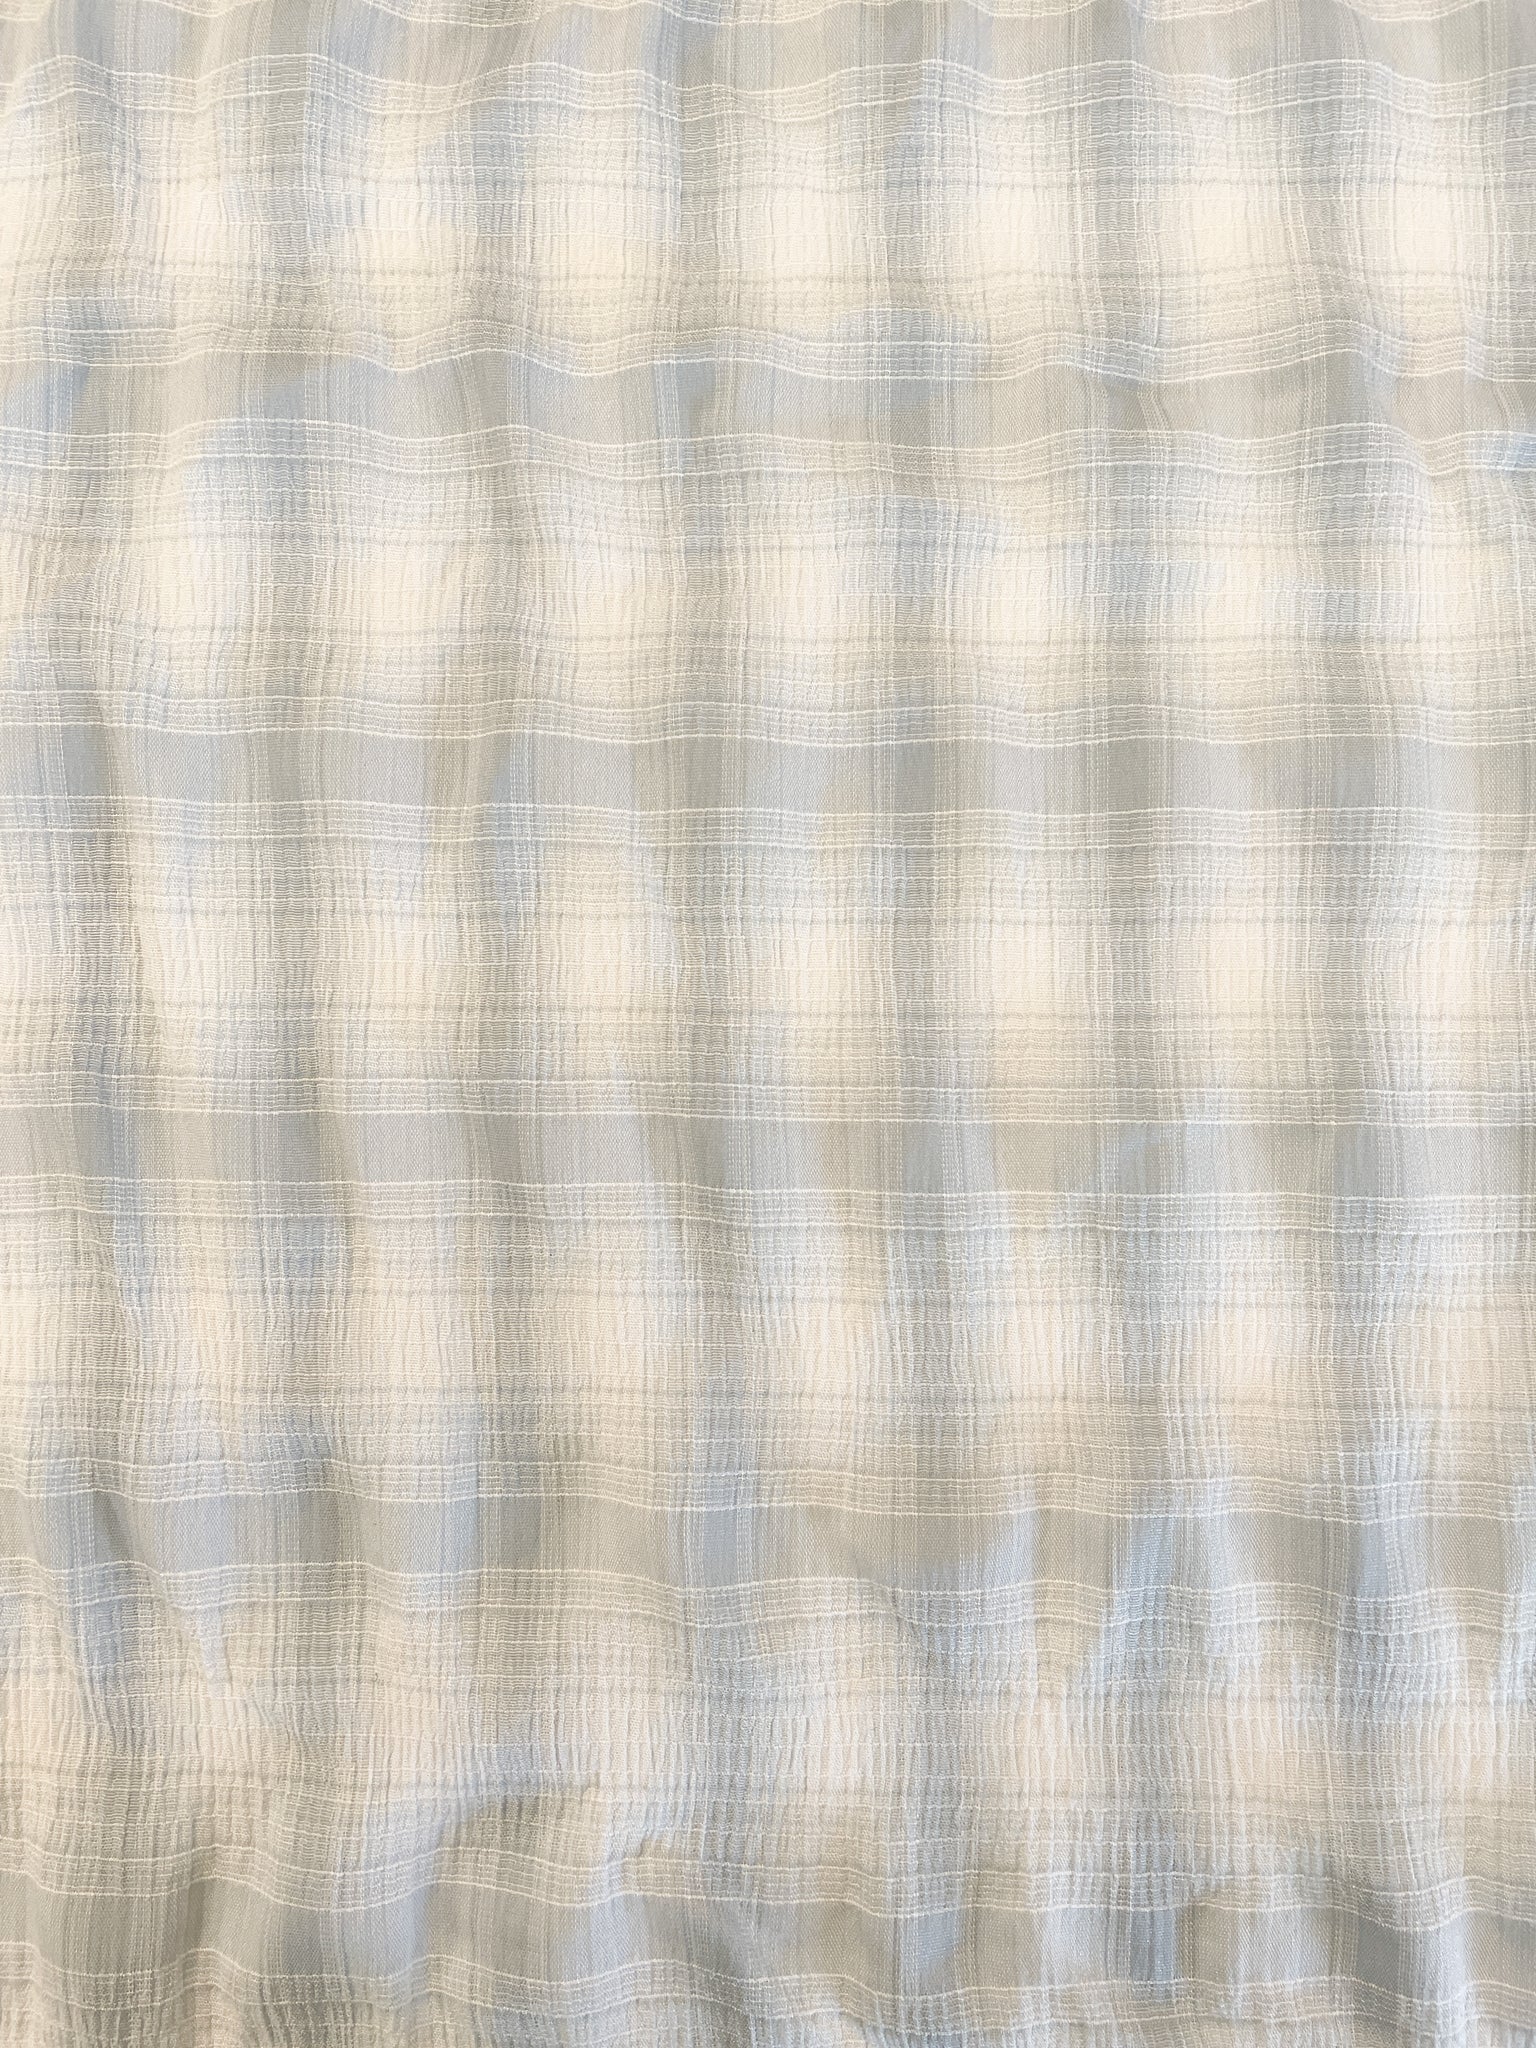 SALE Polyester Blend Crinkle Yarn-Dyed Plaid - Cool Gray and White